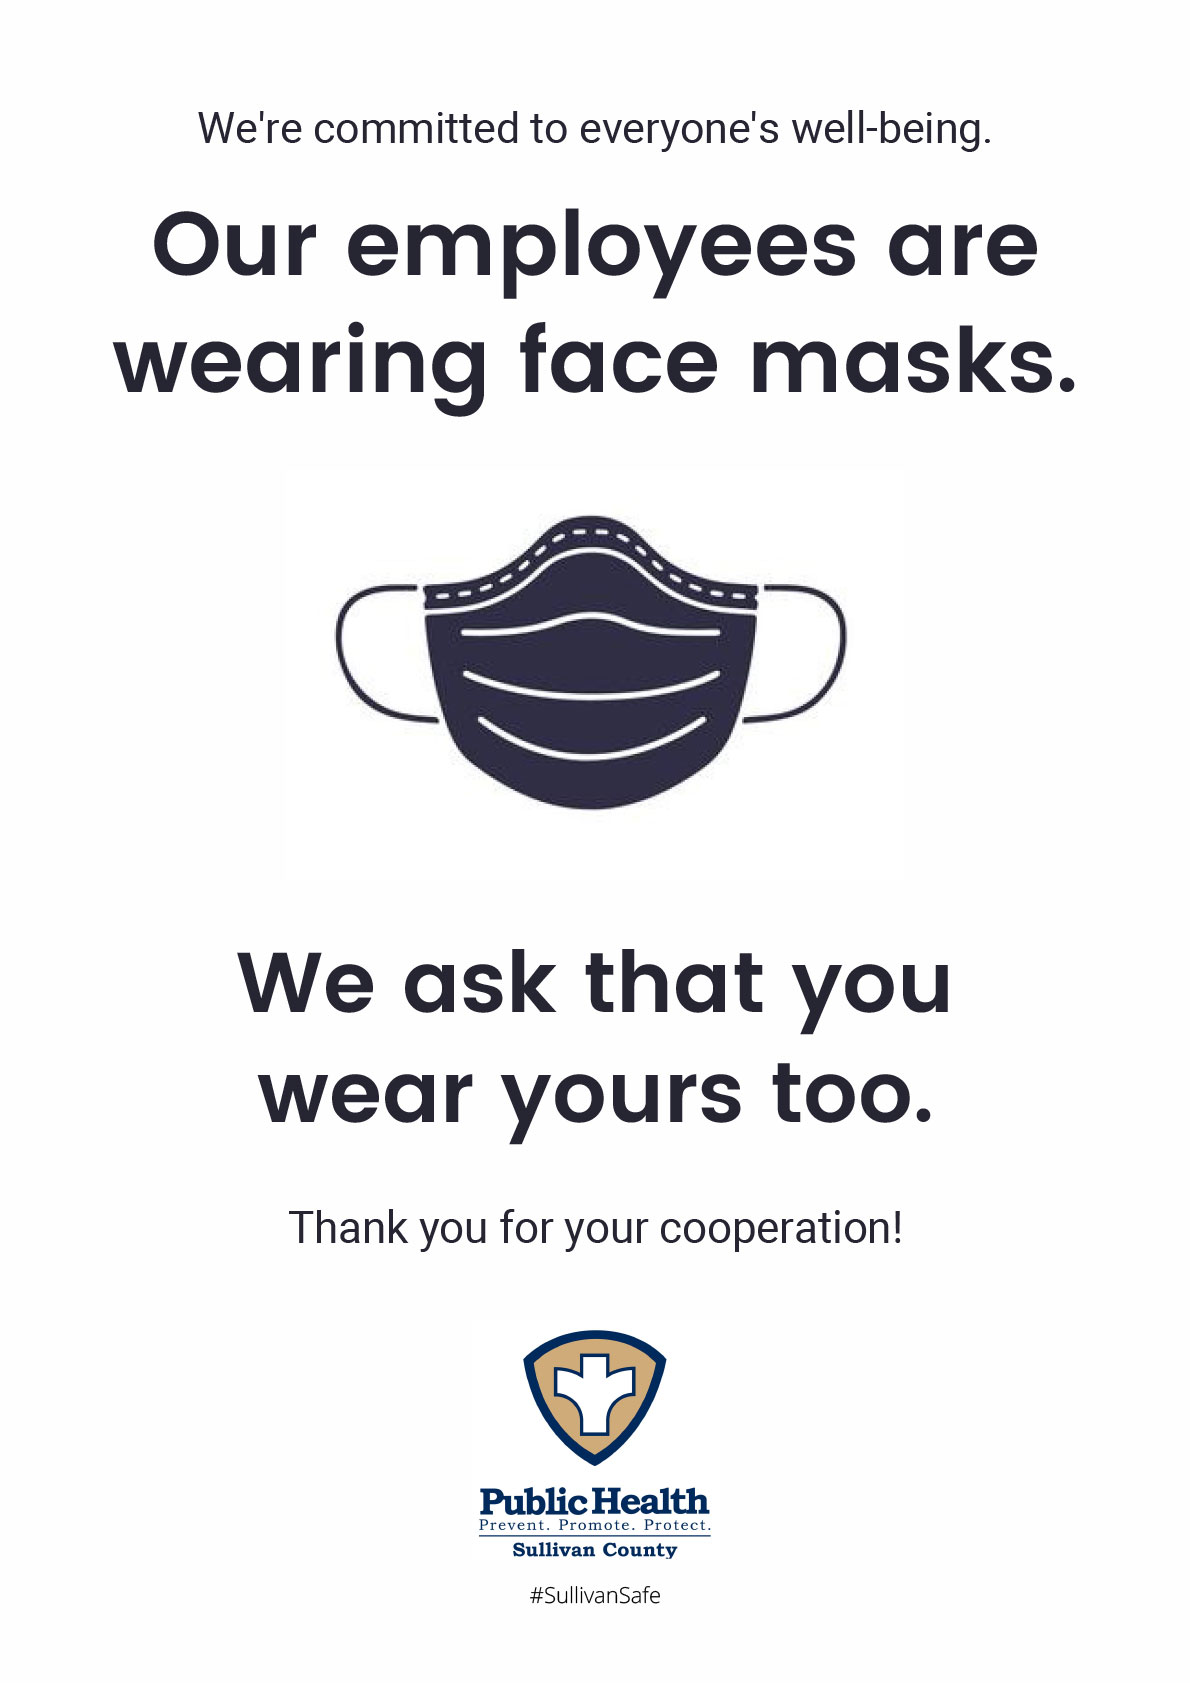 Our employees are wearing face masks